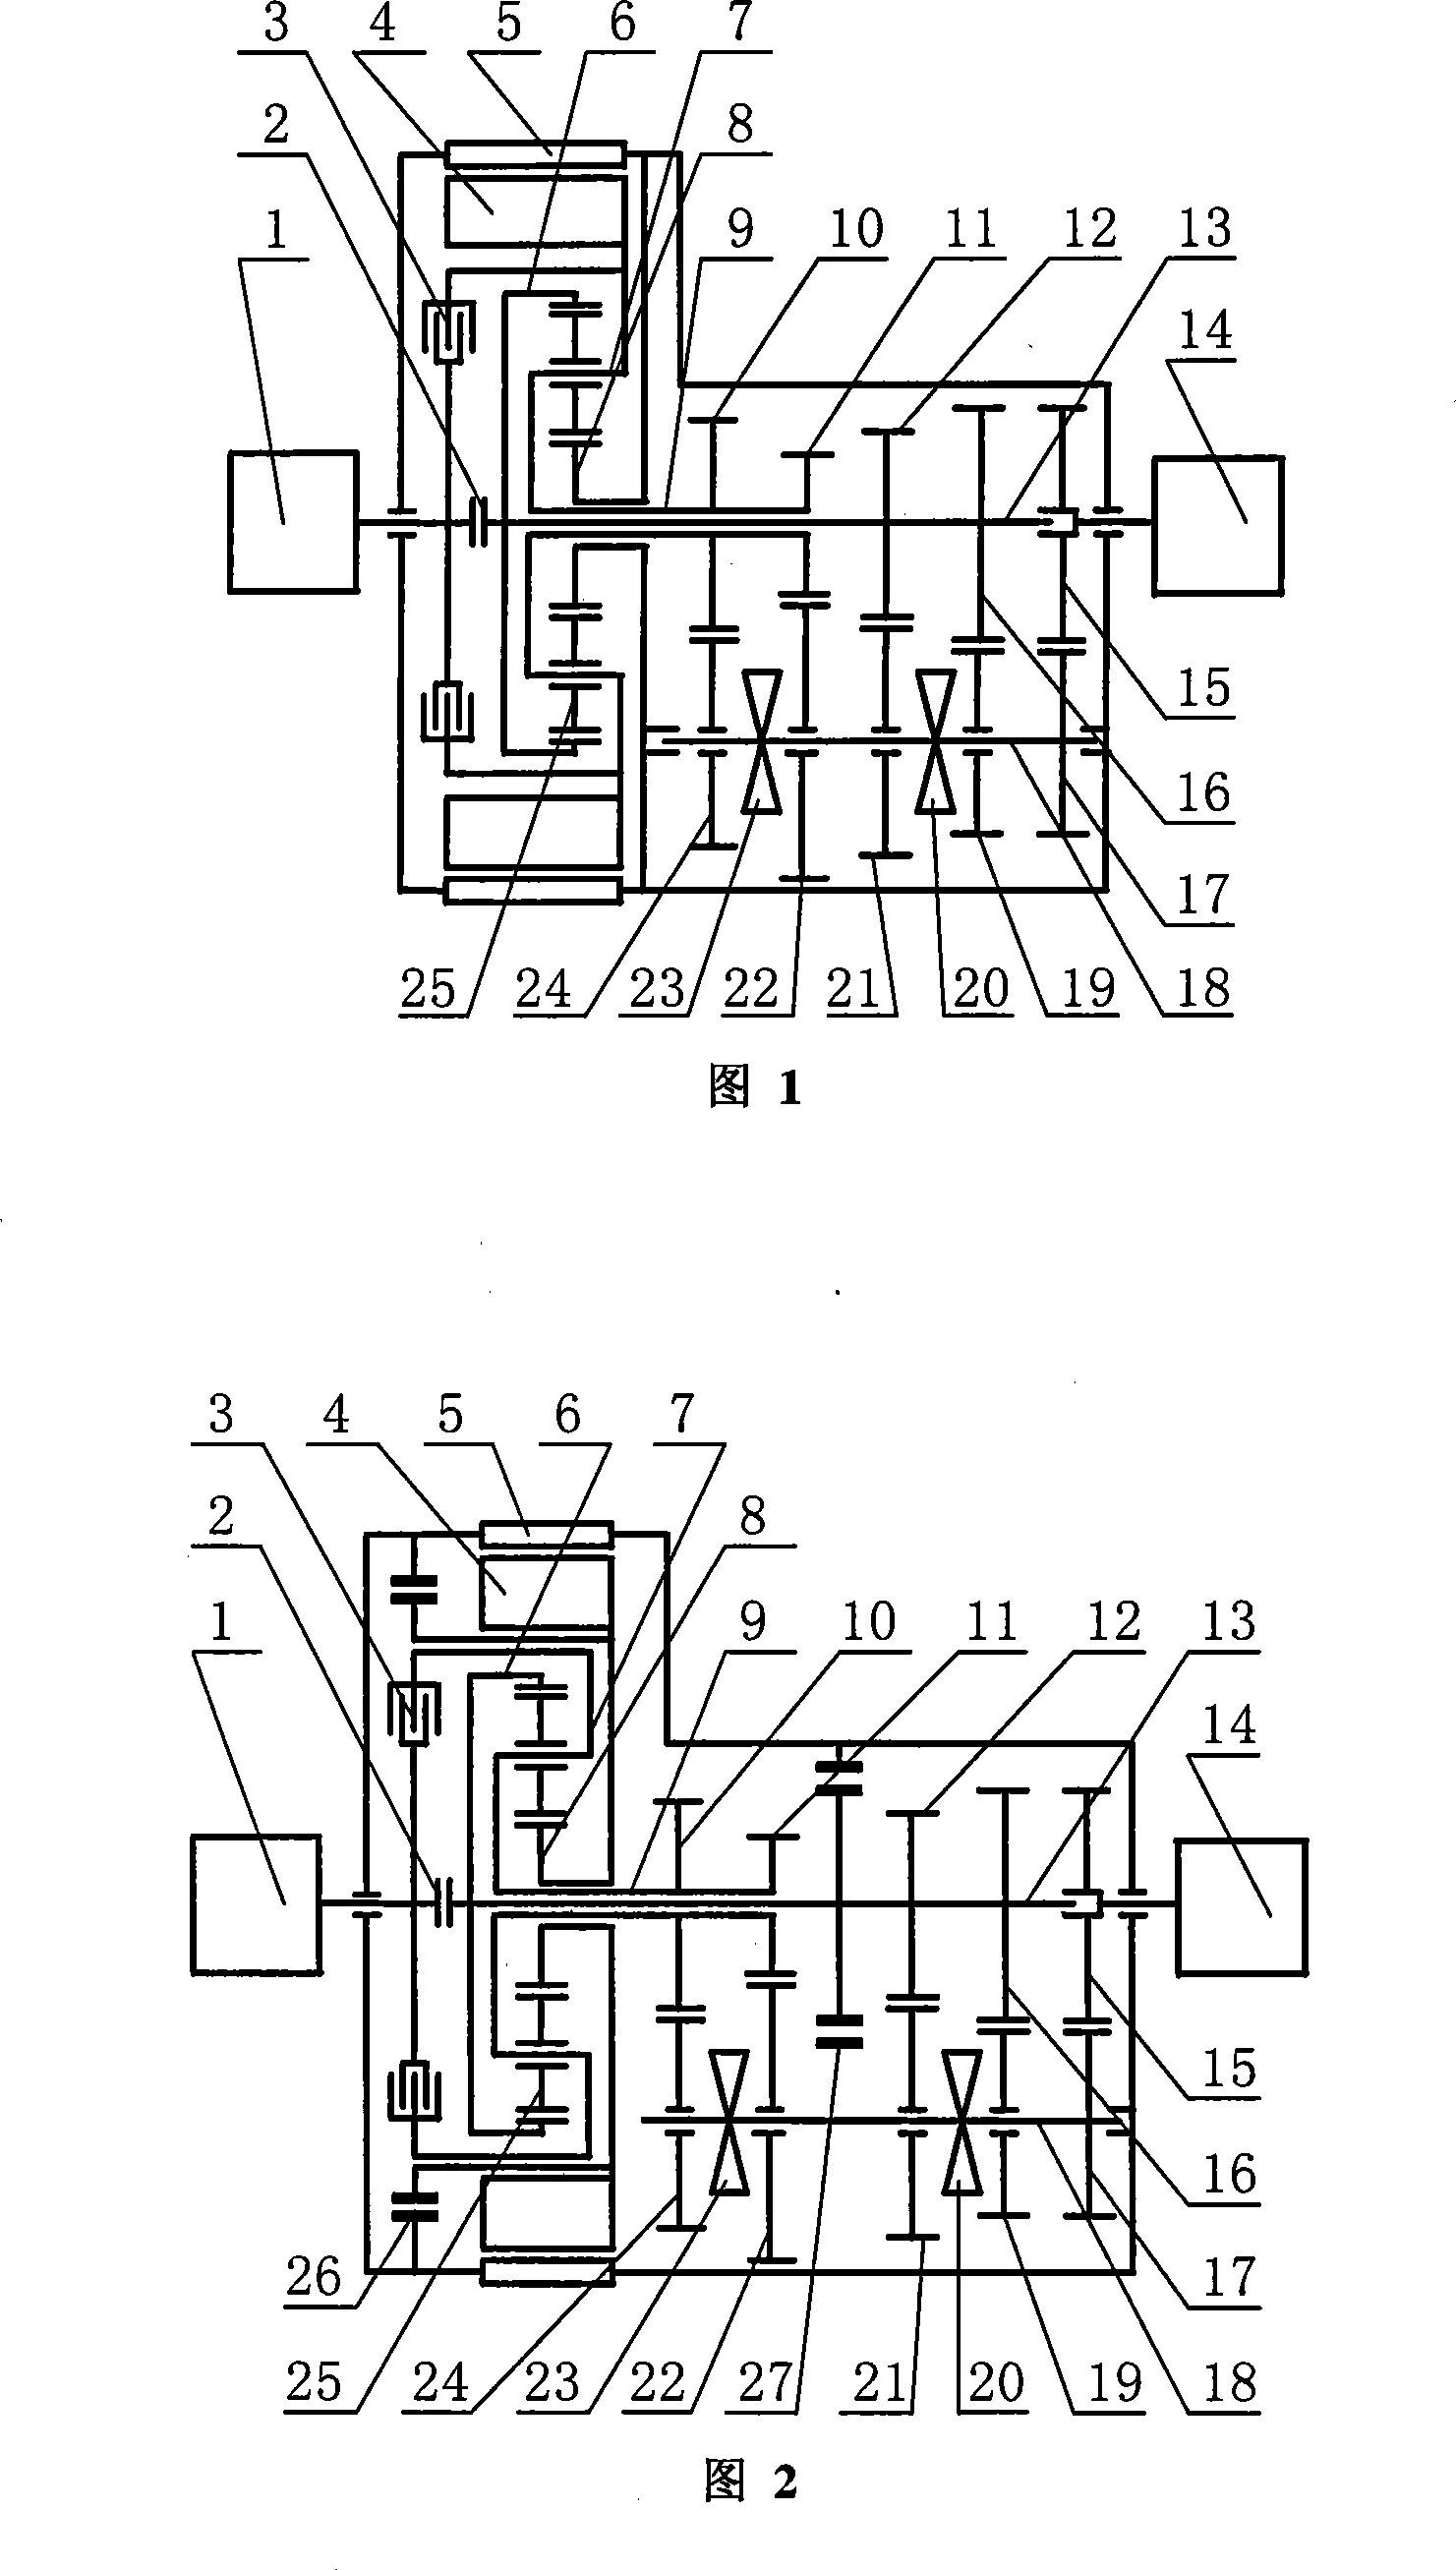 Double-clutch mixed power vehicle driving system